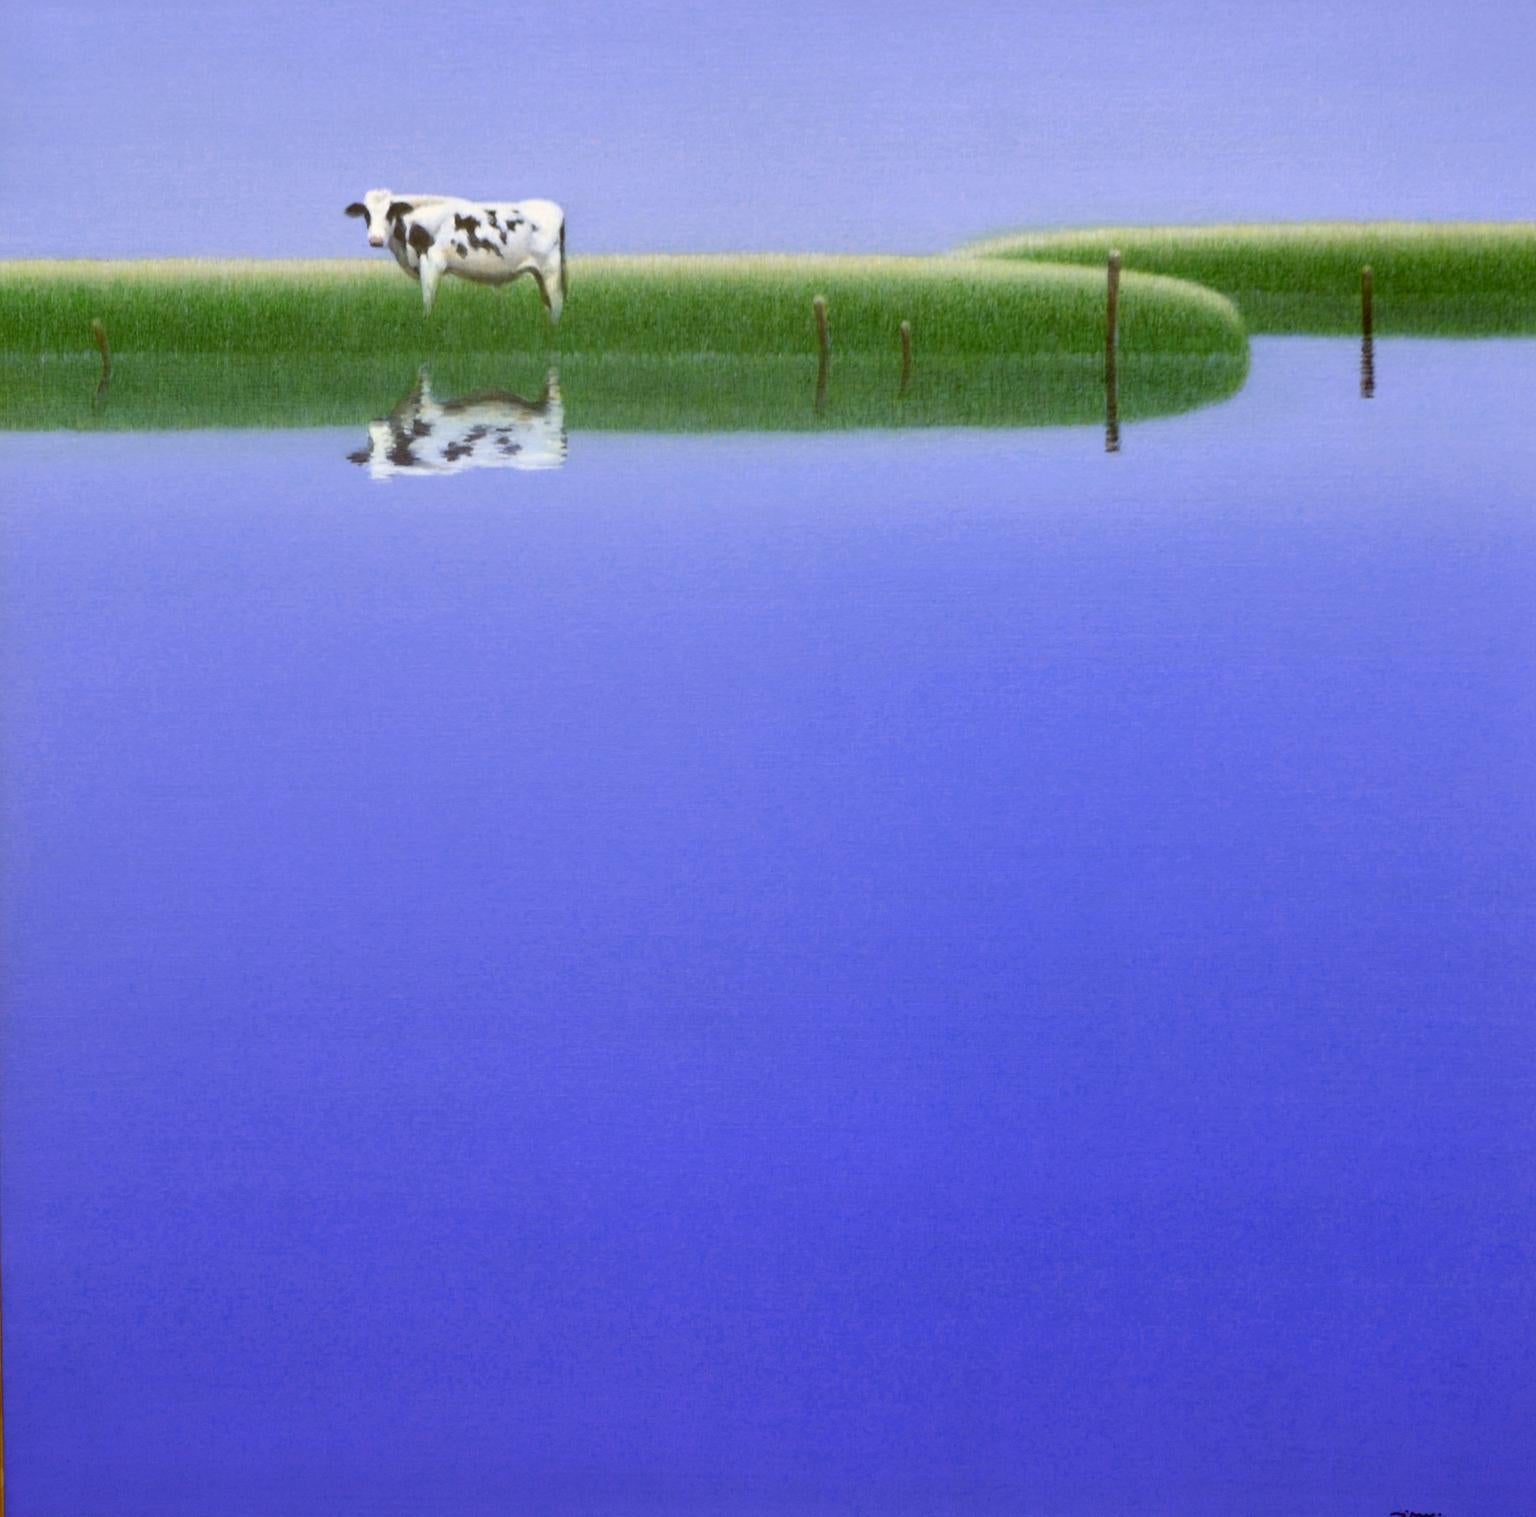 "Morning Graze" by Zu Sheng Yu is a 36x36 oil painting on canvas. This painting depicts a deep blue sky and pond, with green grass surrounding. A cow stands by the water, with its reflection showing in the water. This contemporary landscape is a